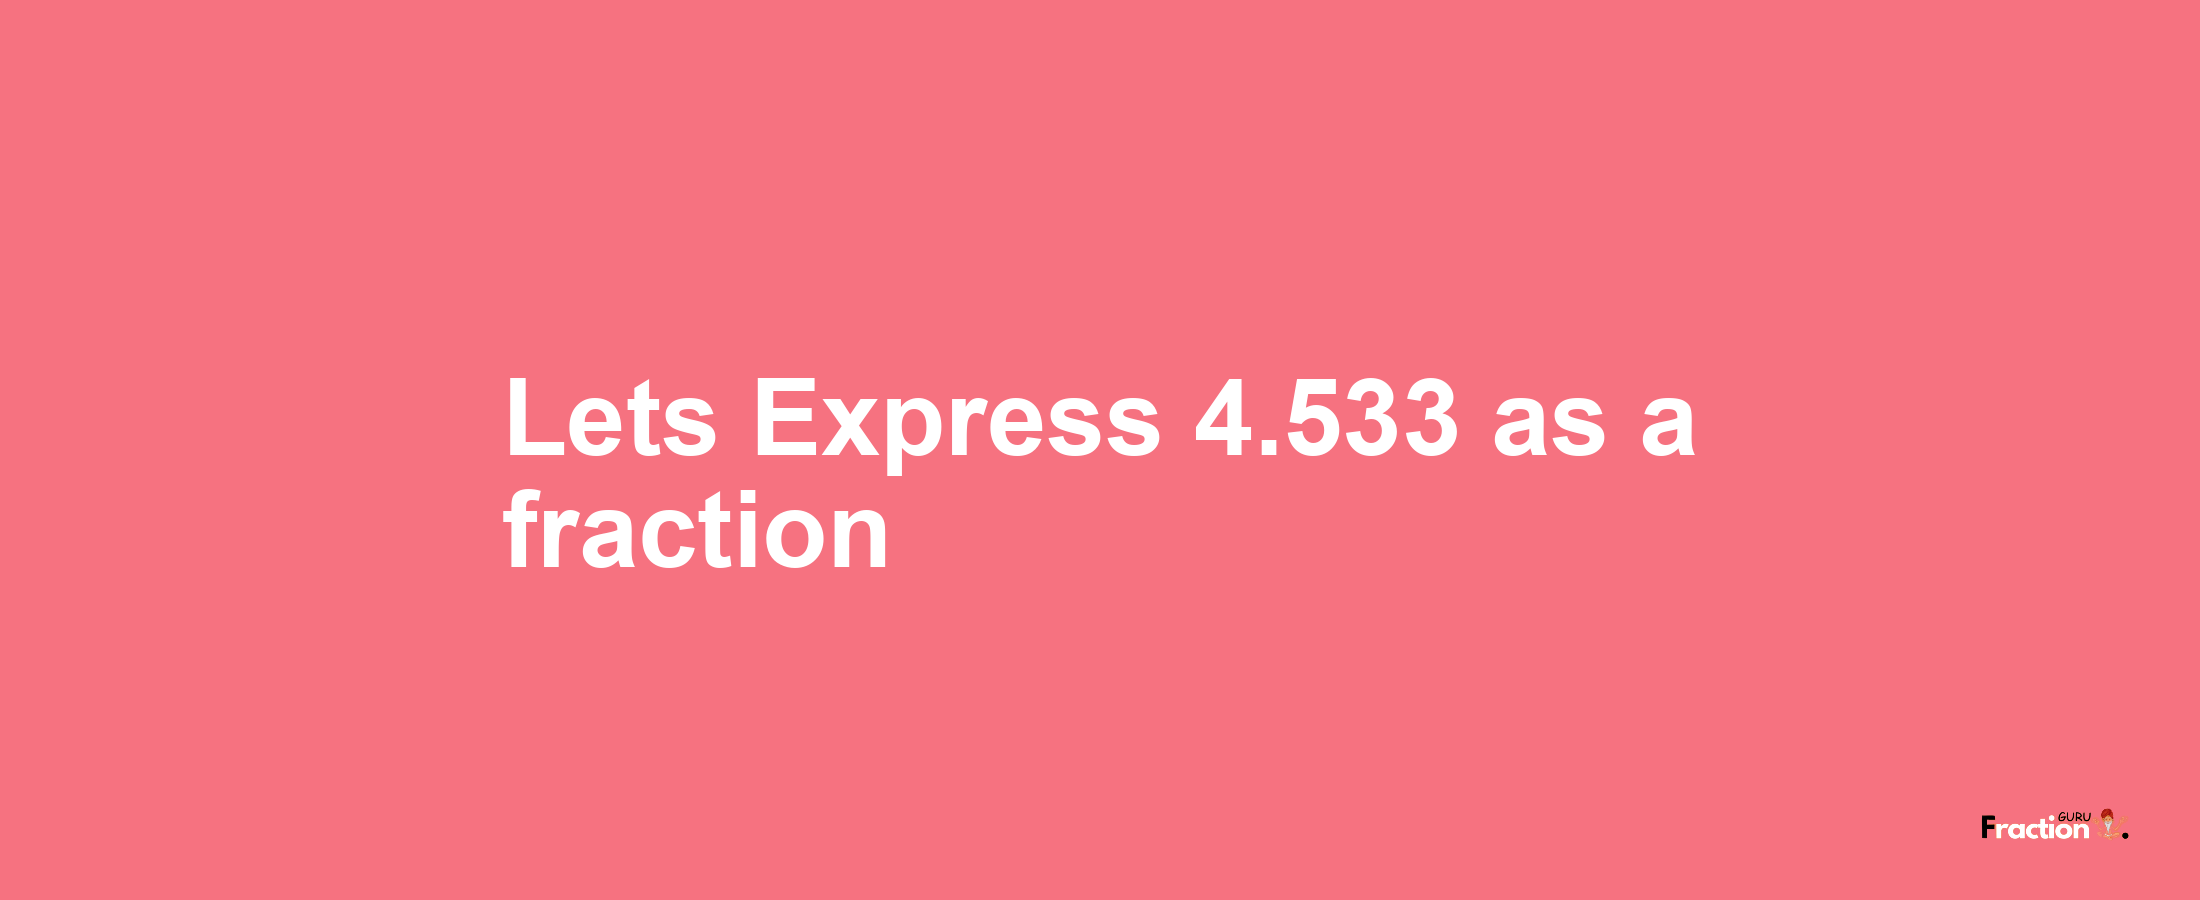 Lets Express 4.533 as afraction